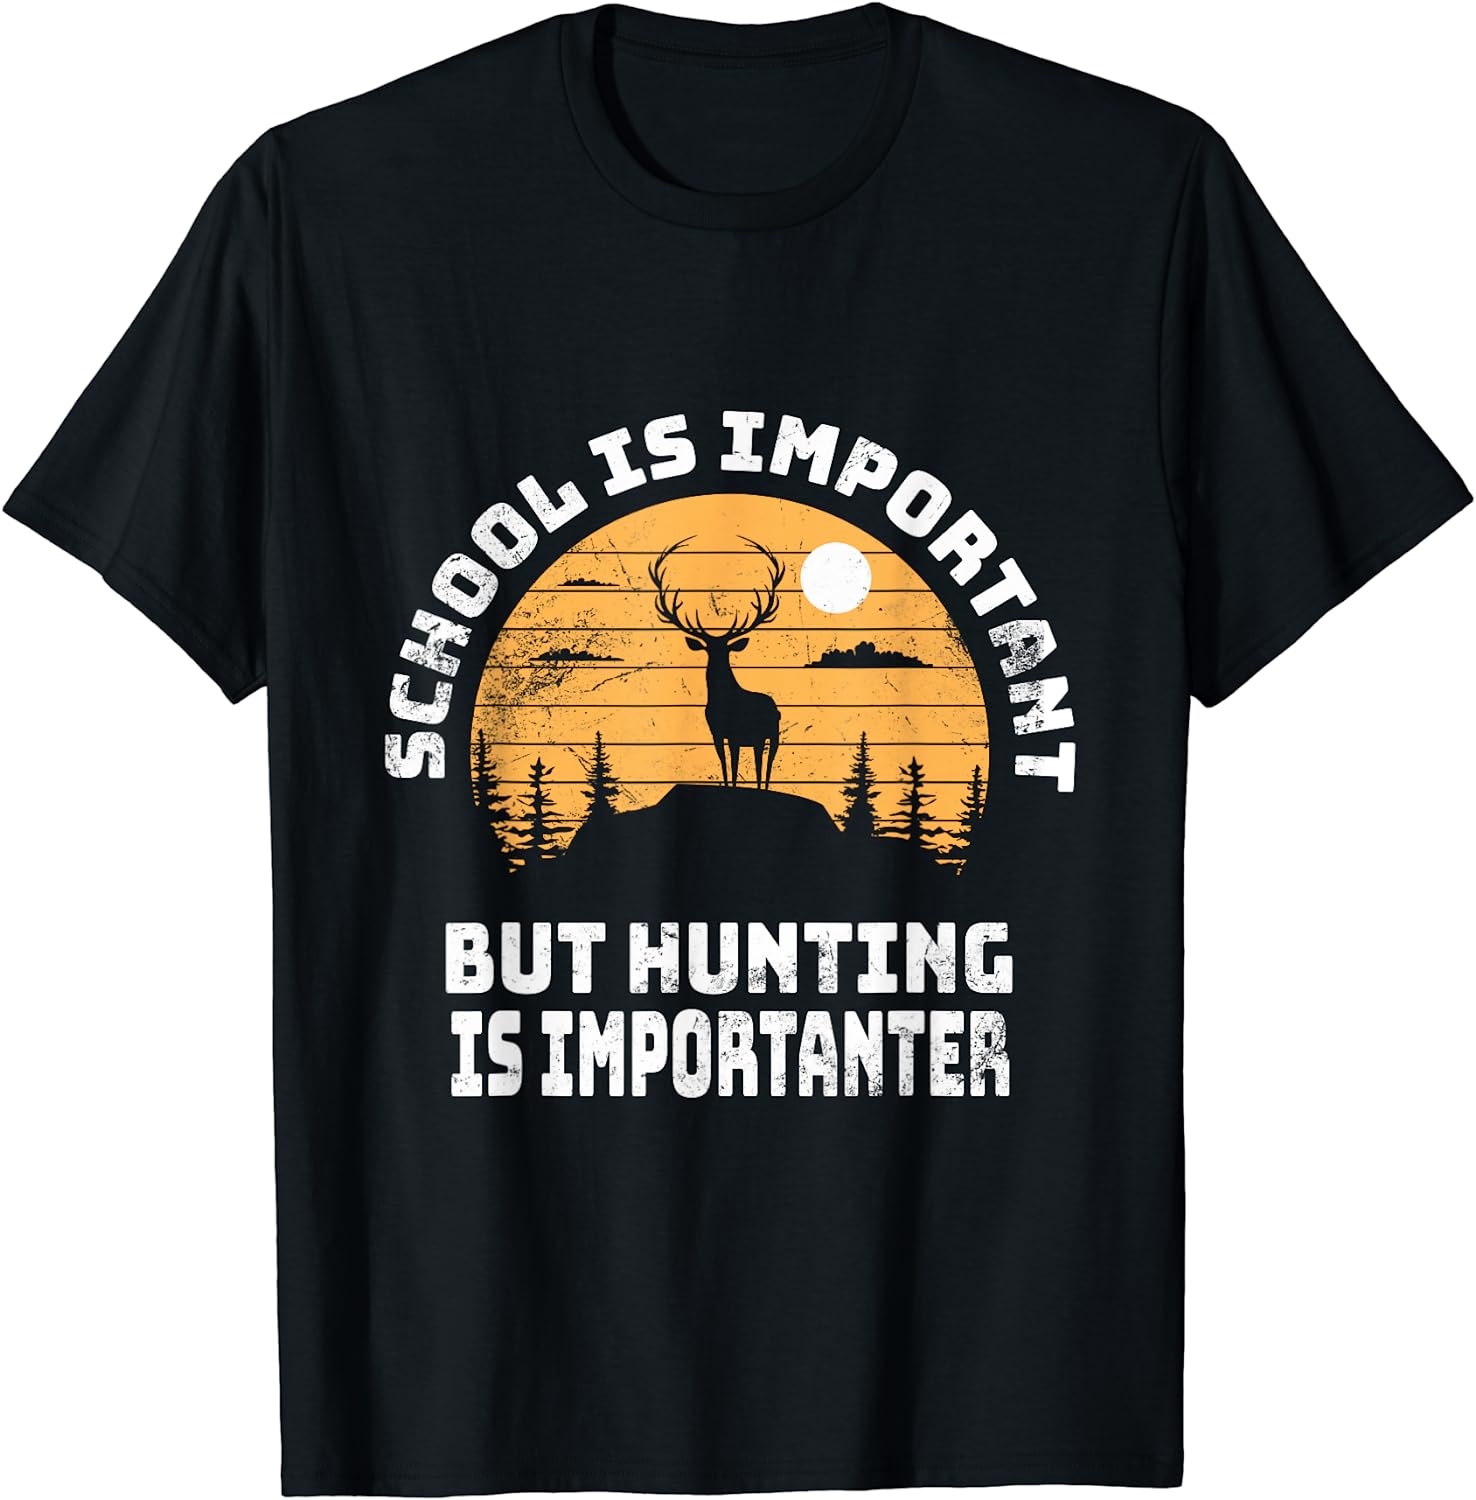 School Is Important But Hunting Is Importanter Deer Hunting T-Shirt Best Price